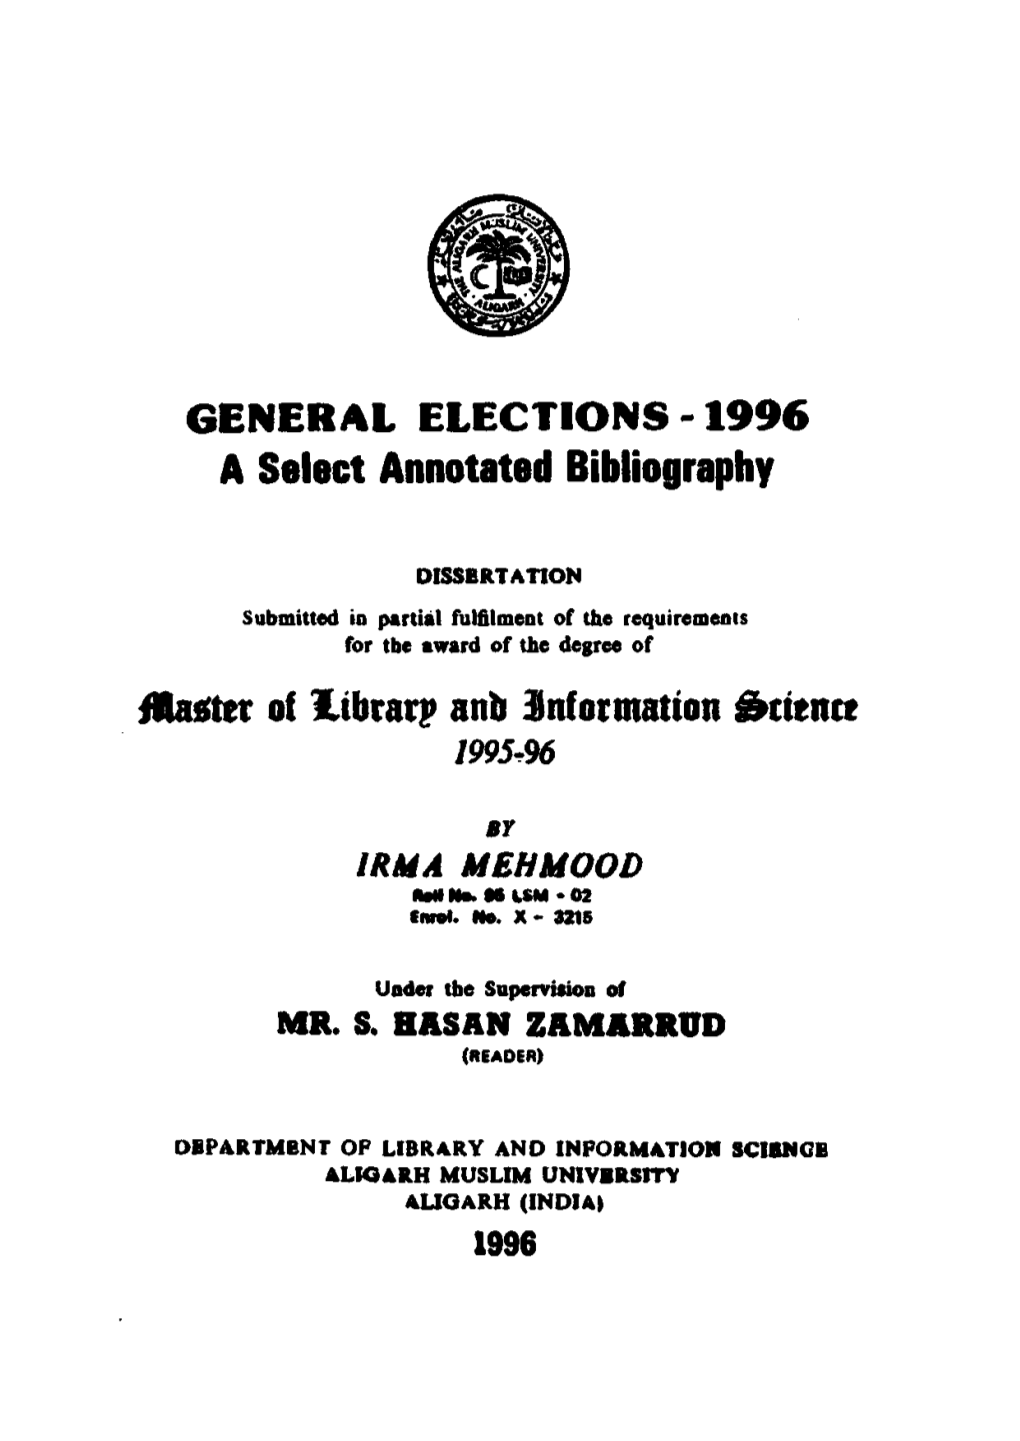 GENERAL ELECTIONS -1996 a Select Annotated Bibliography